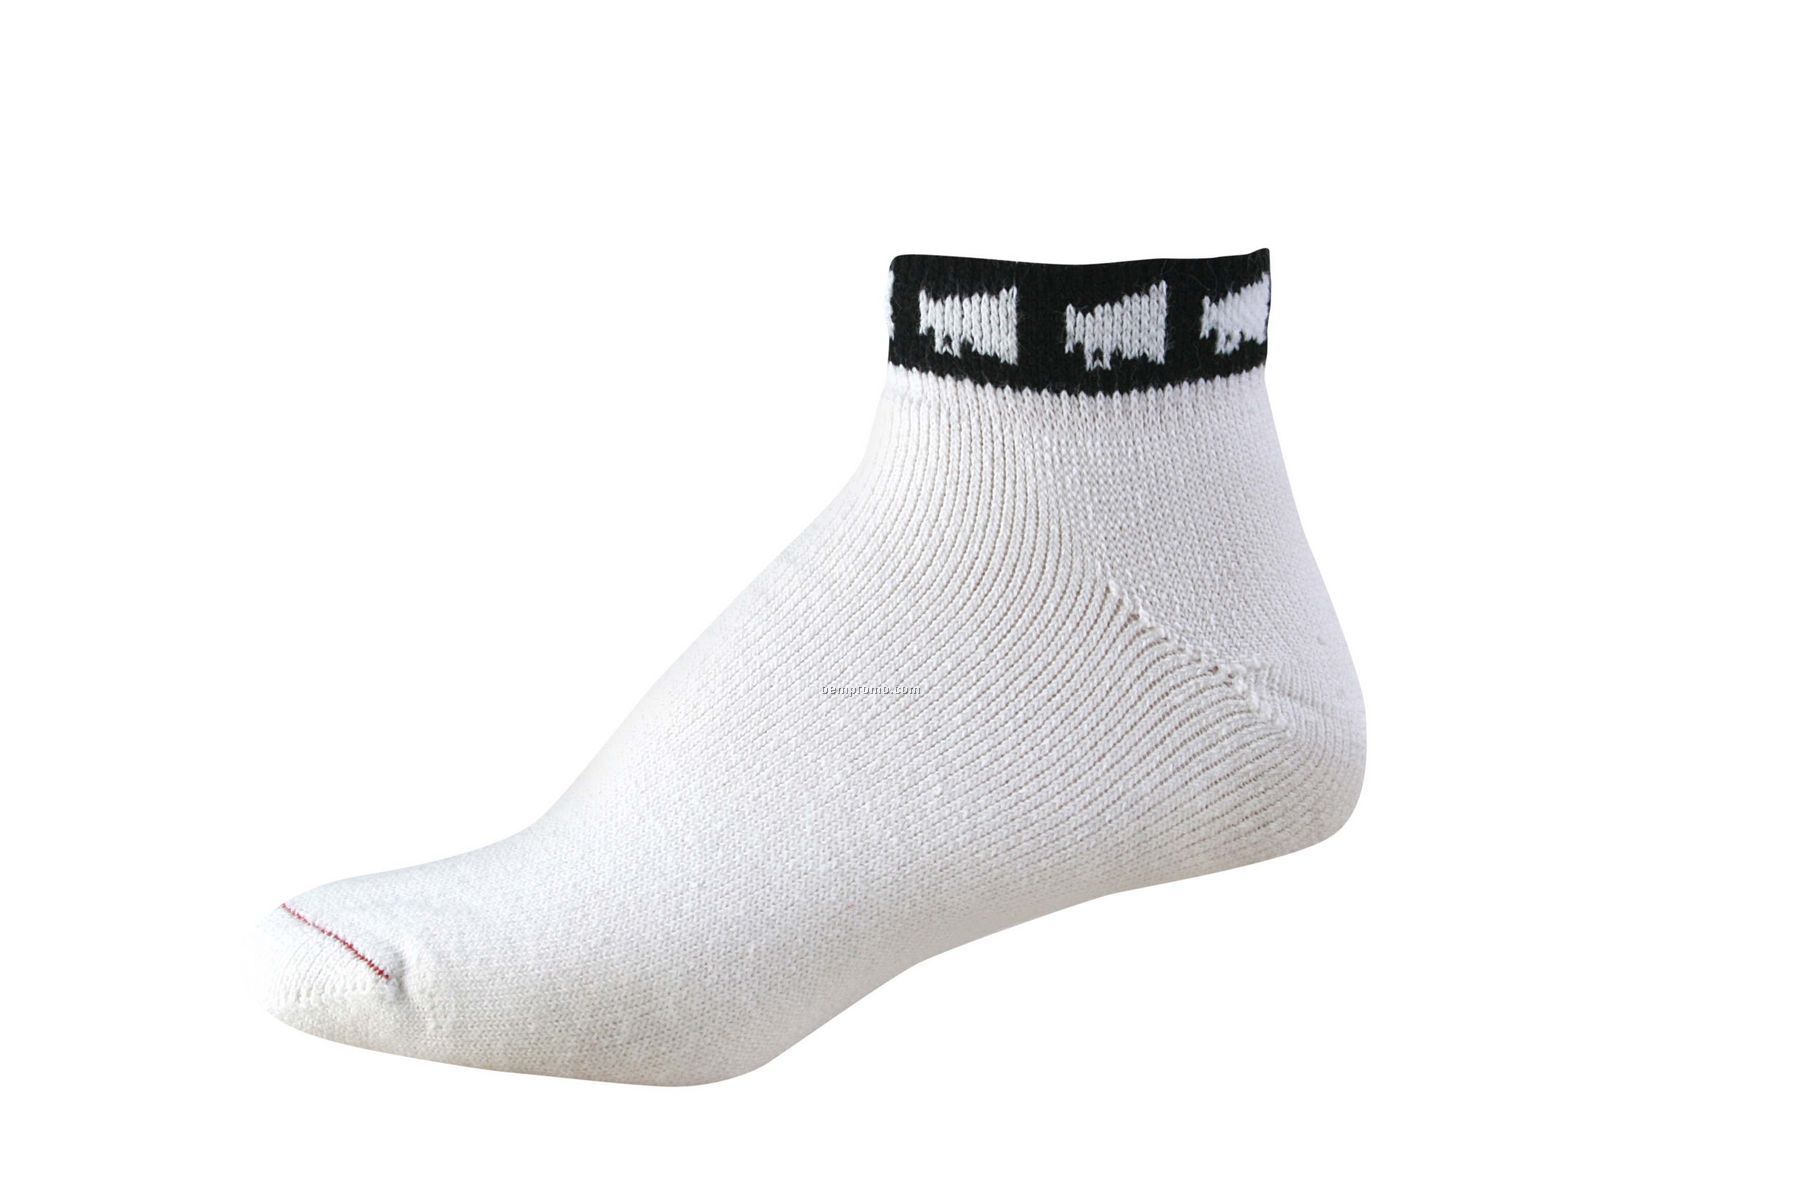 Pizzazz Megaphone Anklet Sock - Youth/Adult